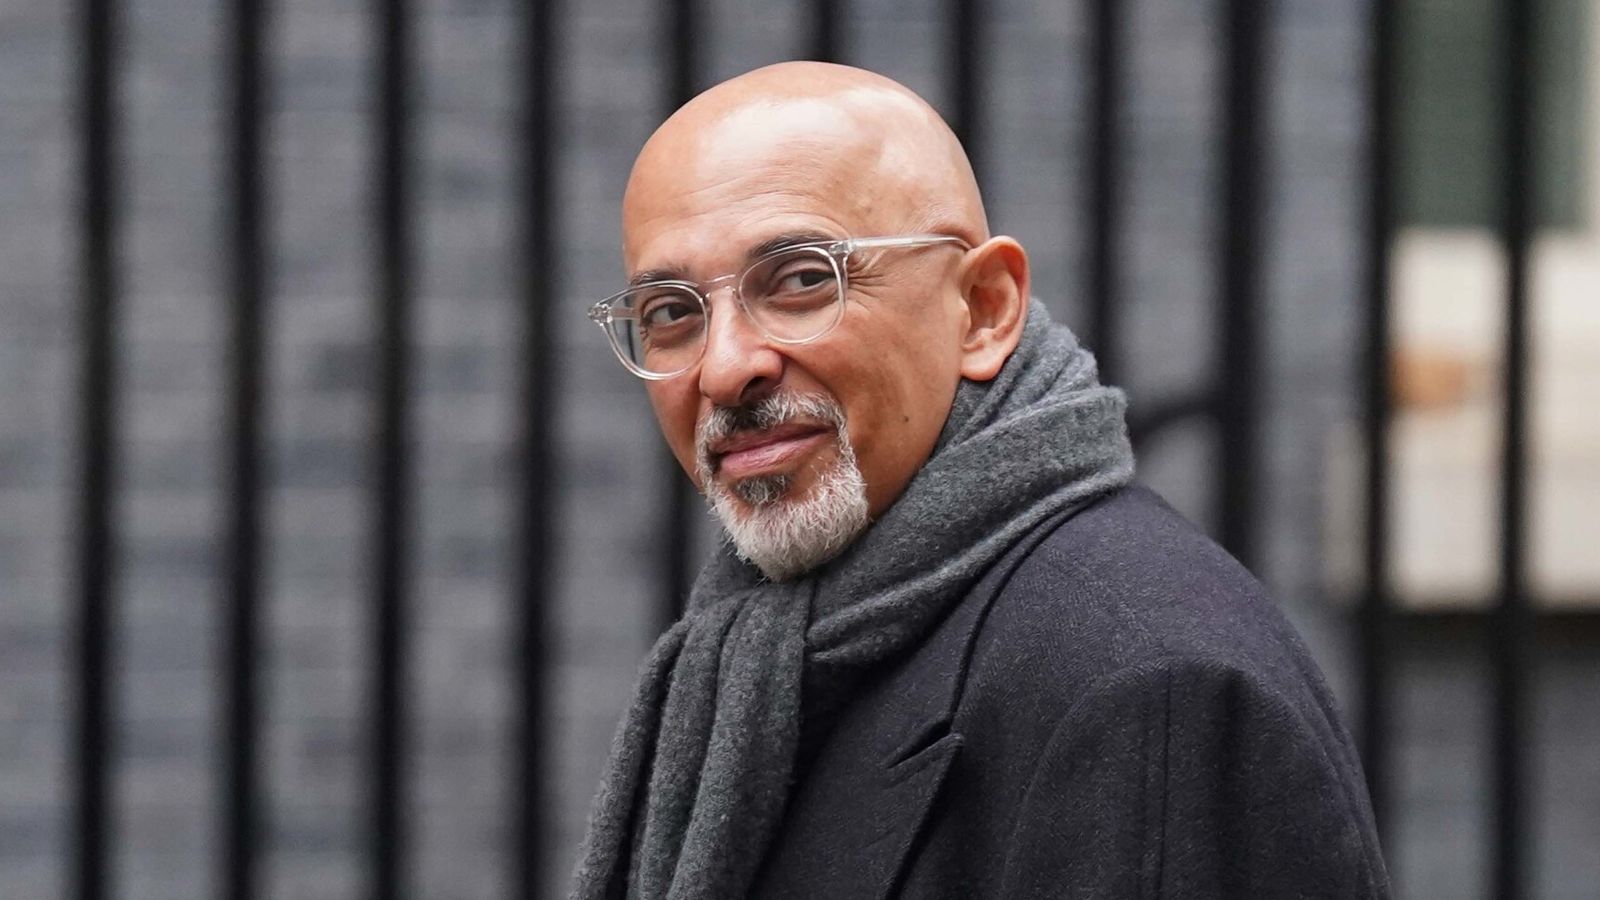 Nadhim Zahawi says tax error was found to be 'careless and not deliberate' after calls for his sacking